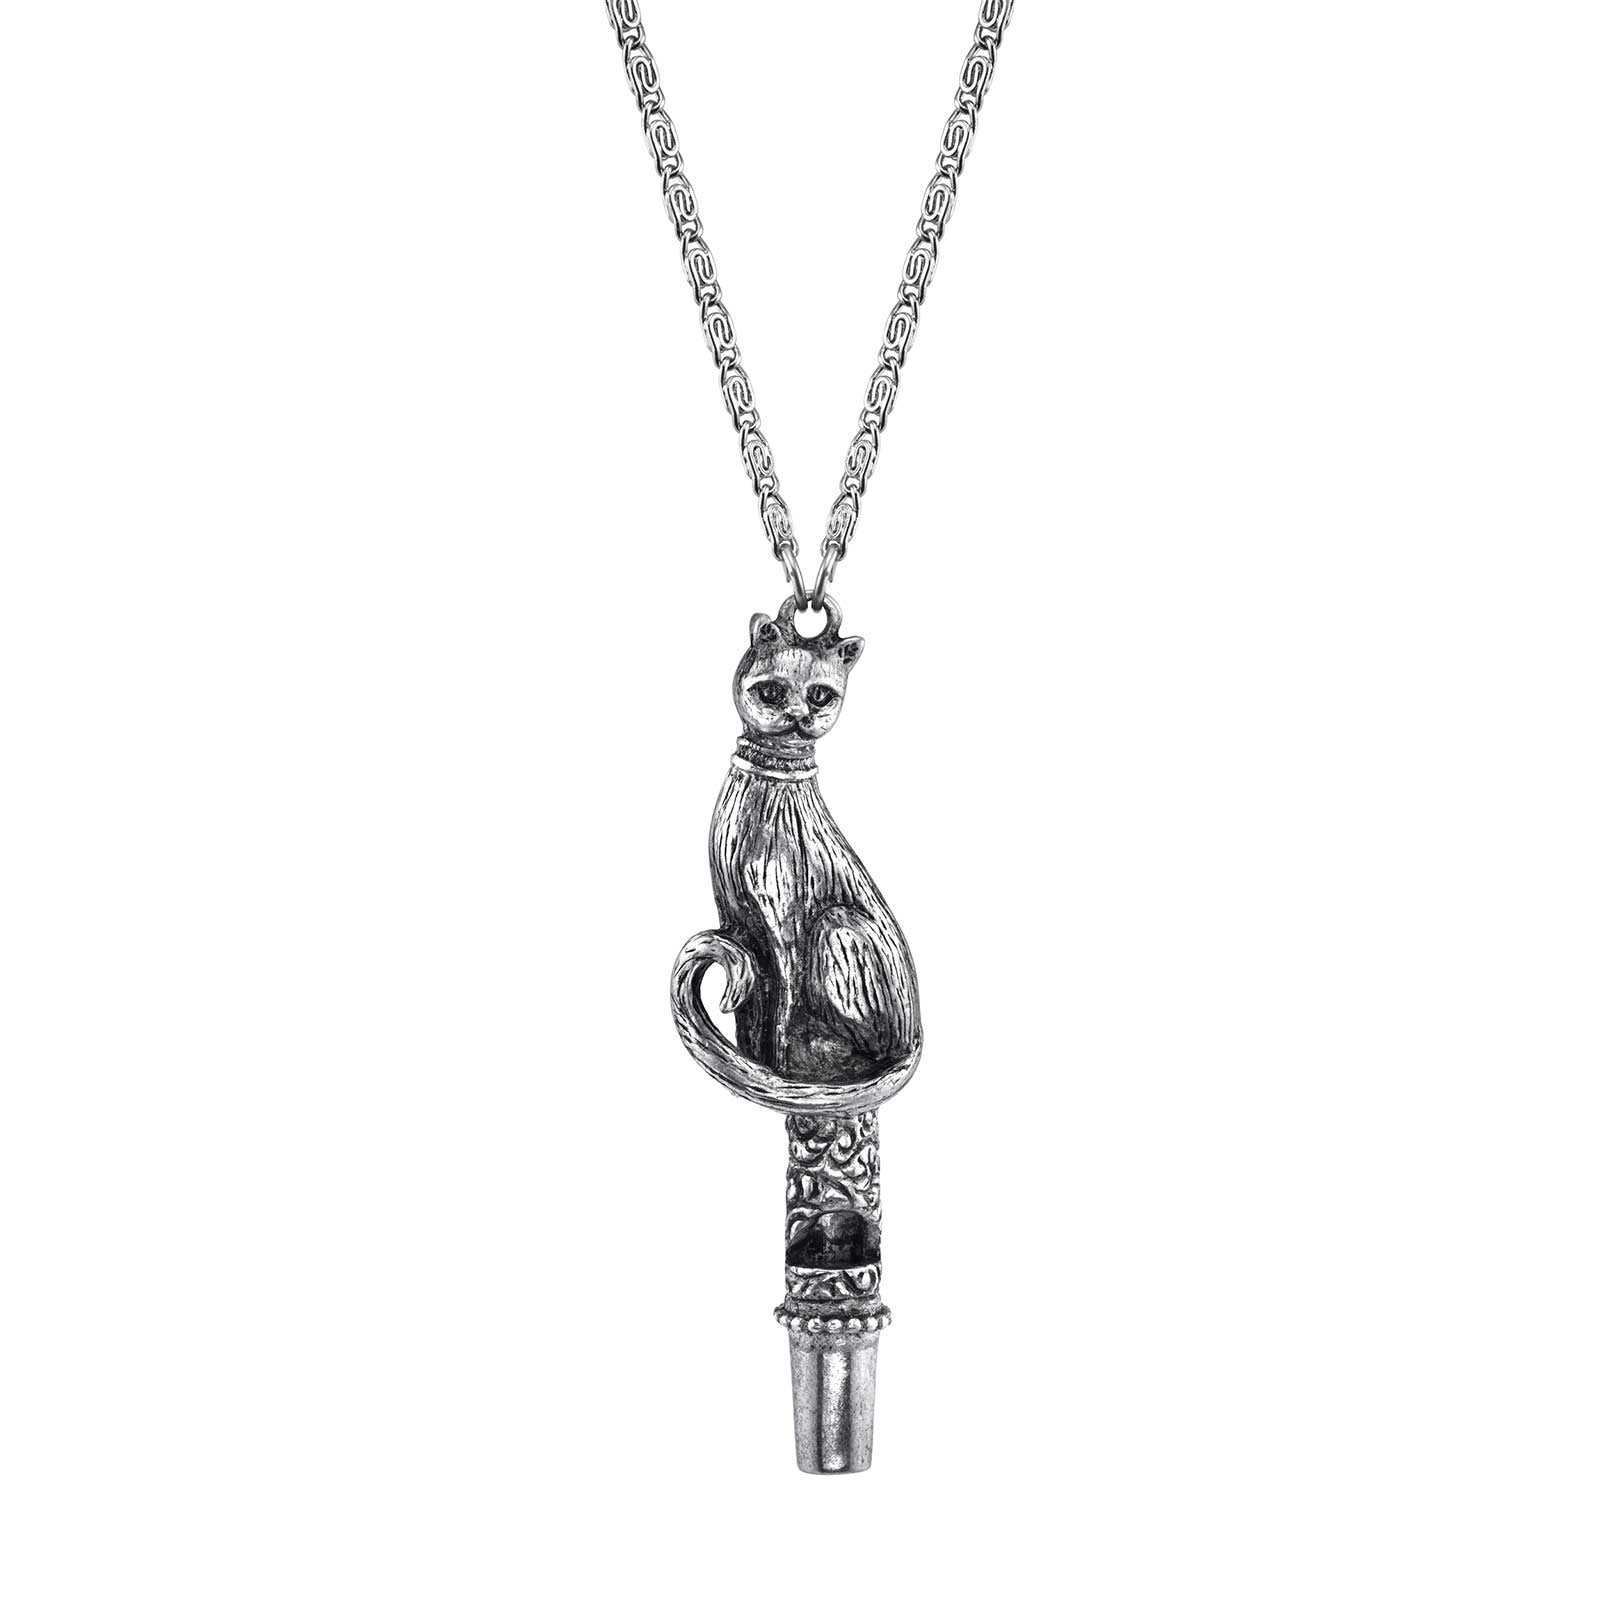 30 1928 Jewelry Antiqued Pewter Tone Cat Whistle Pendant Necklace 